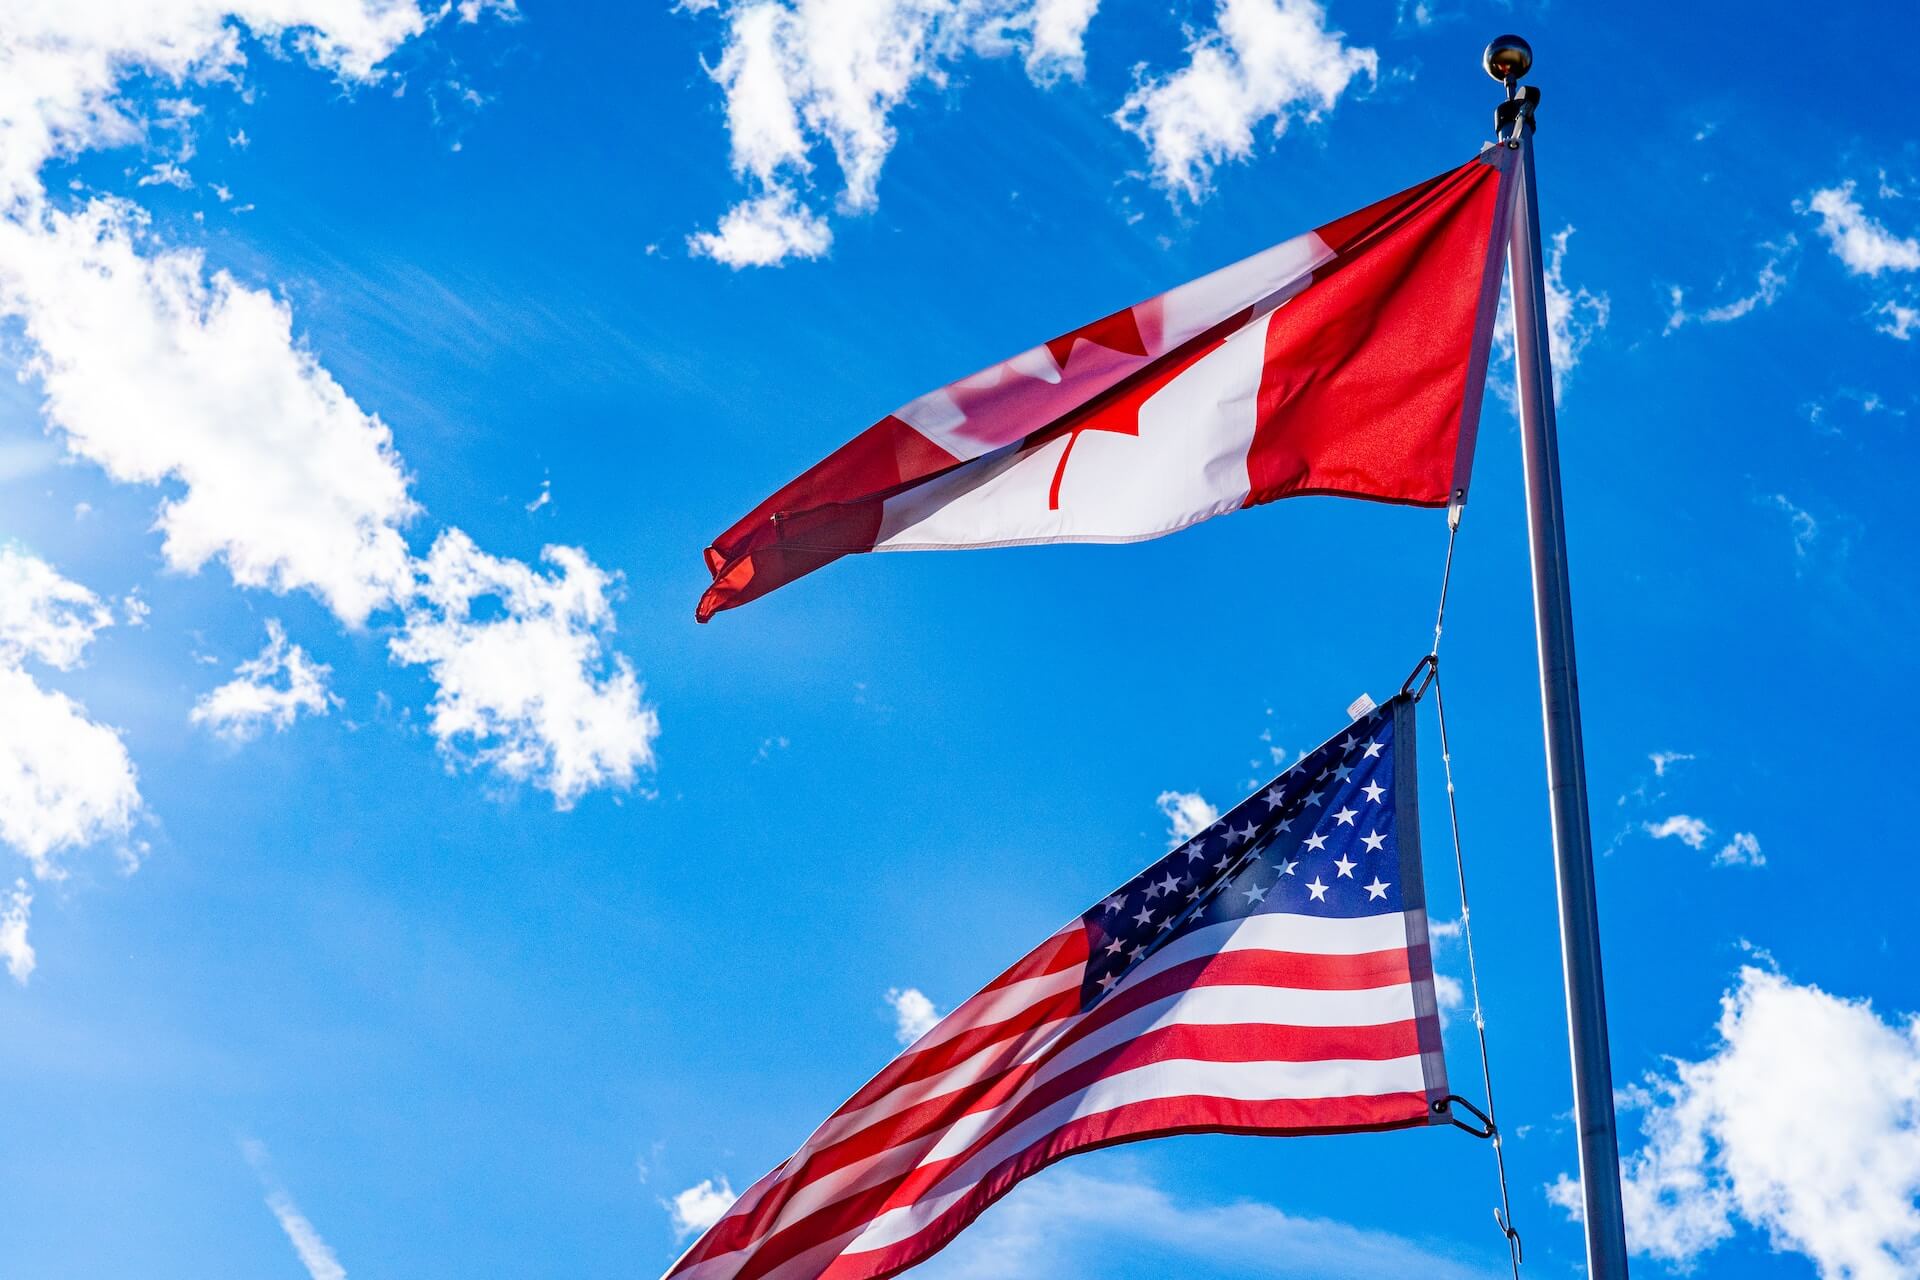 Canadian and America flags flying together